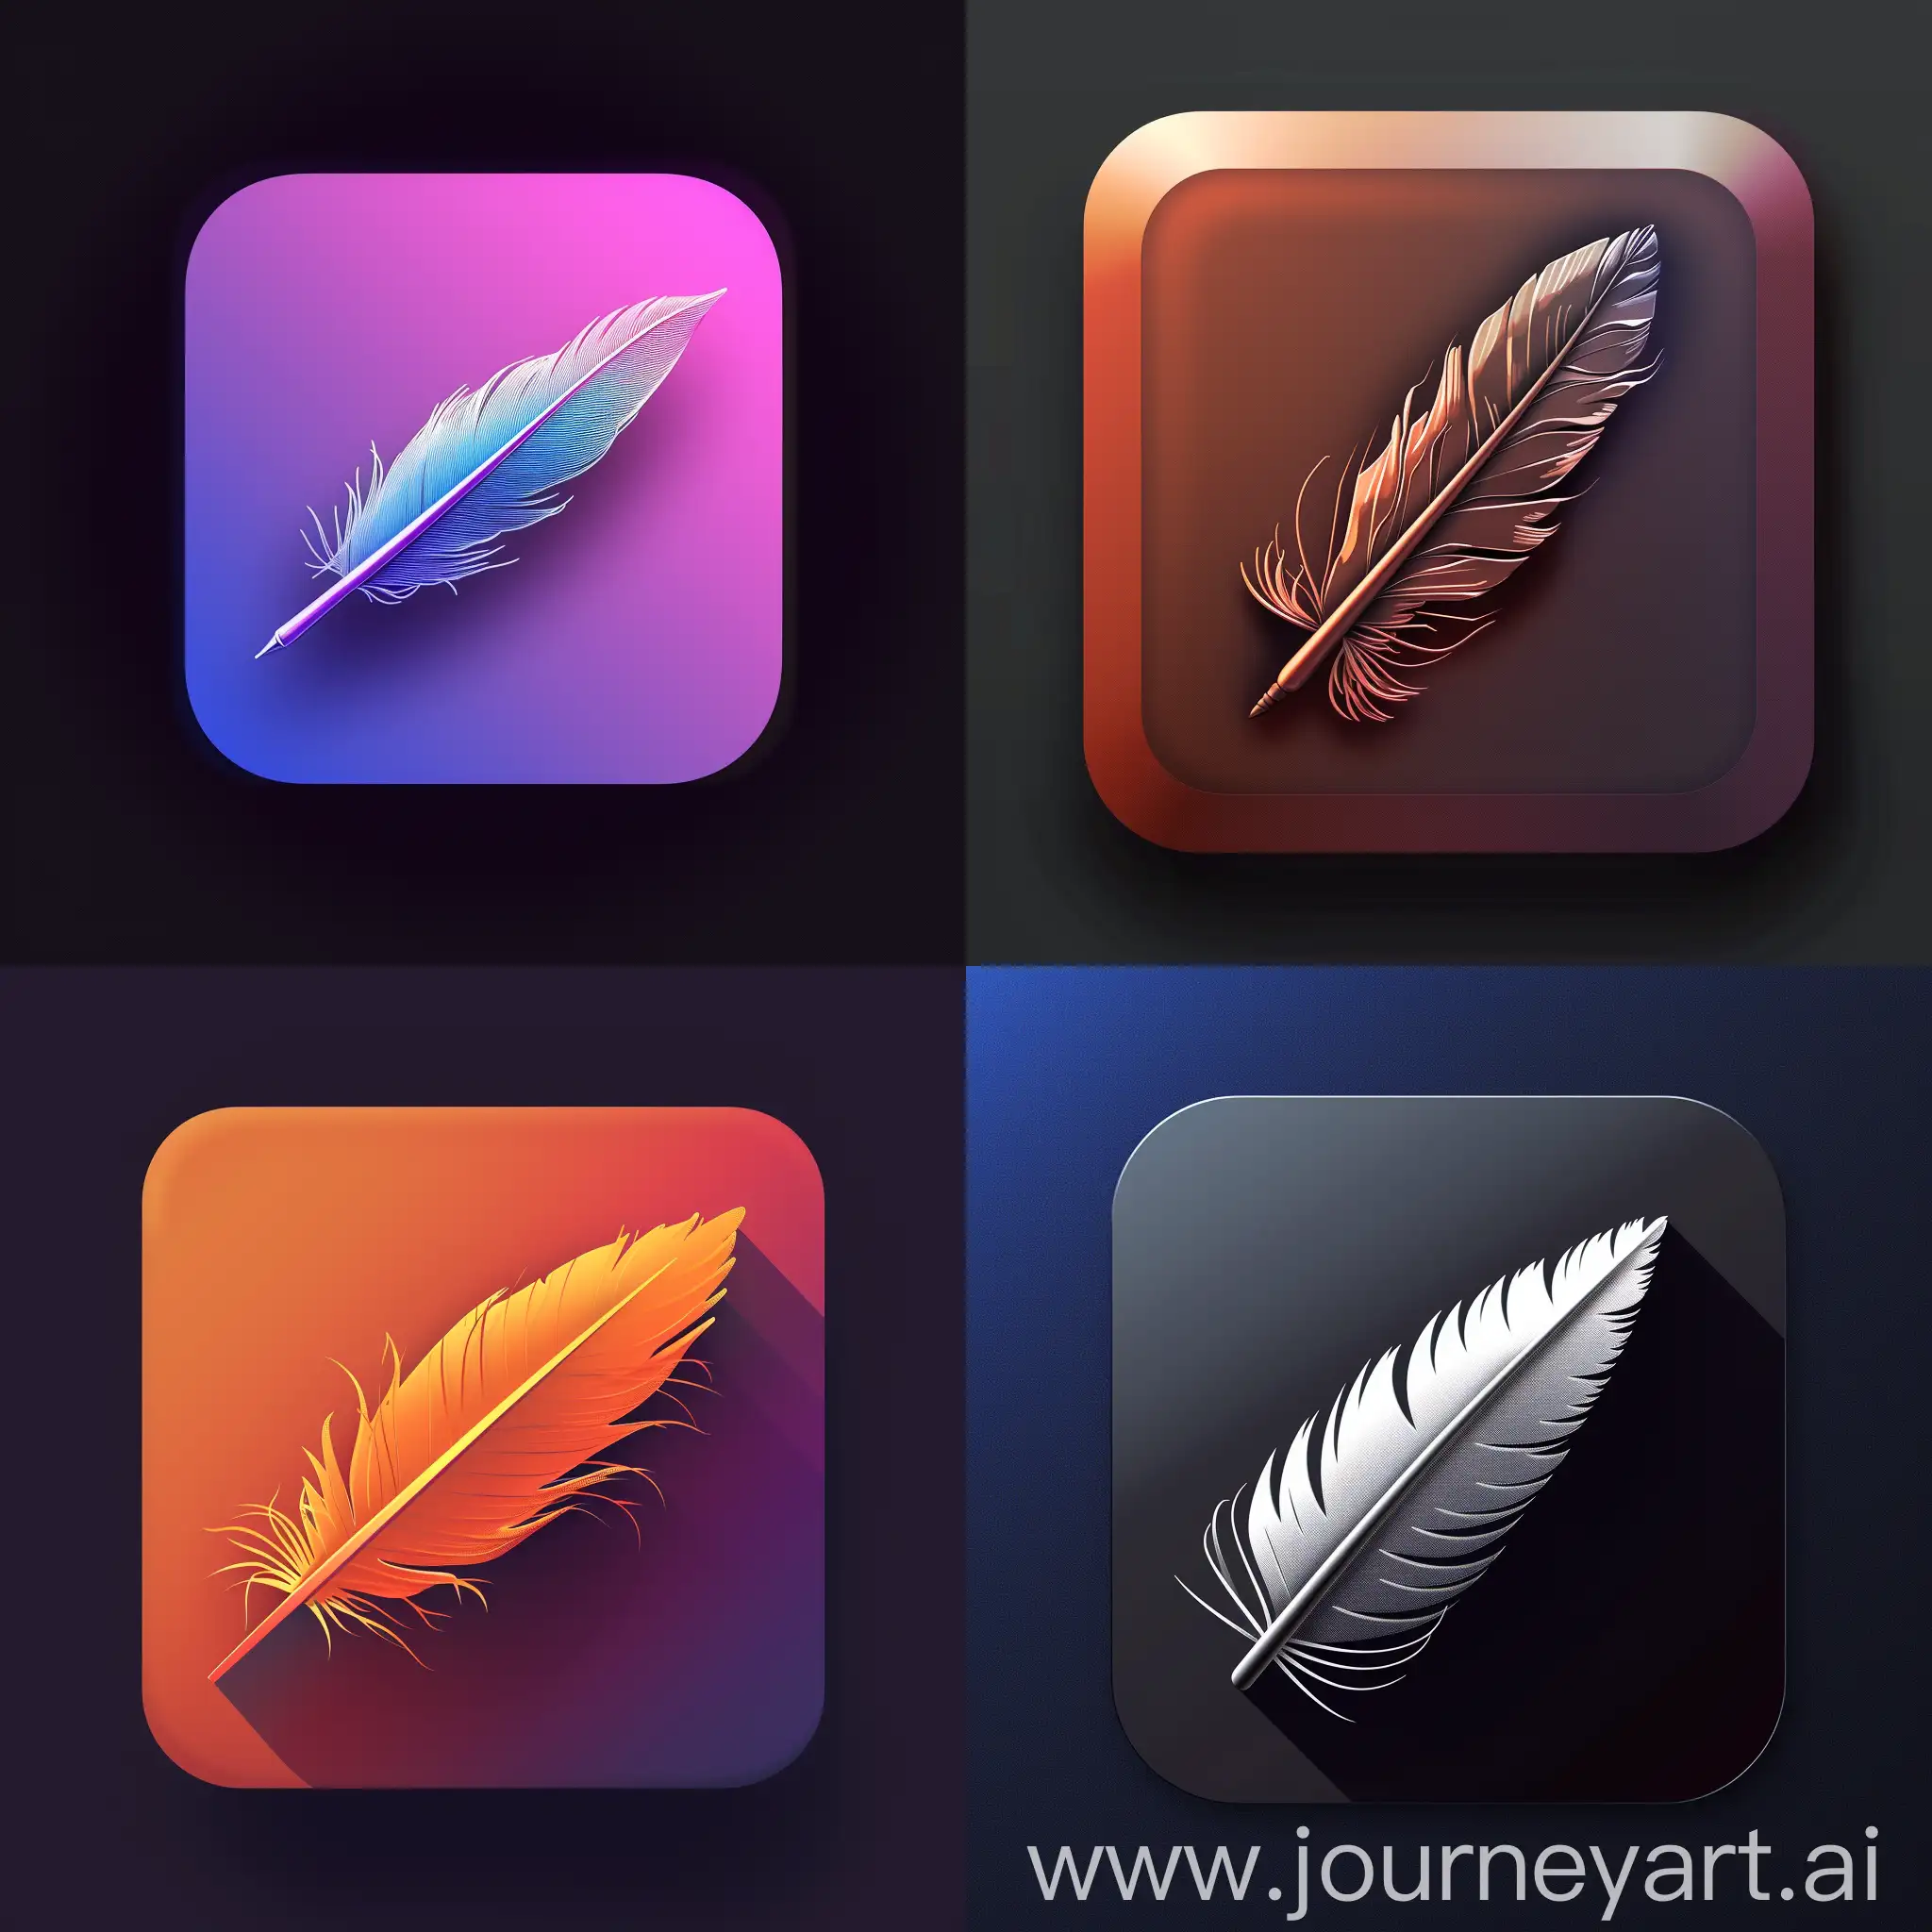 A square app icon with round edges, a quill, minimal background.